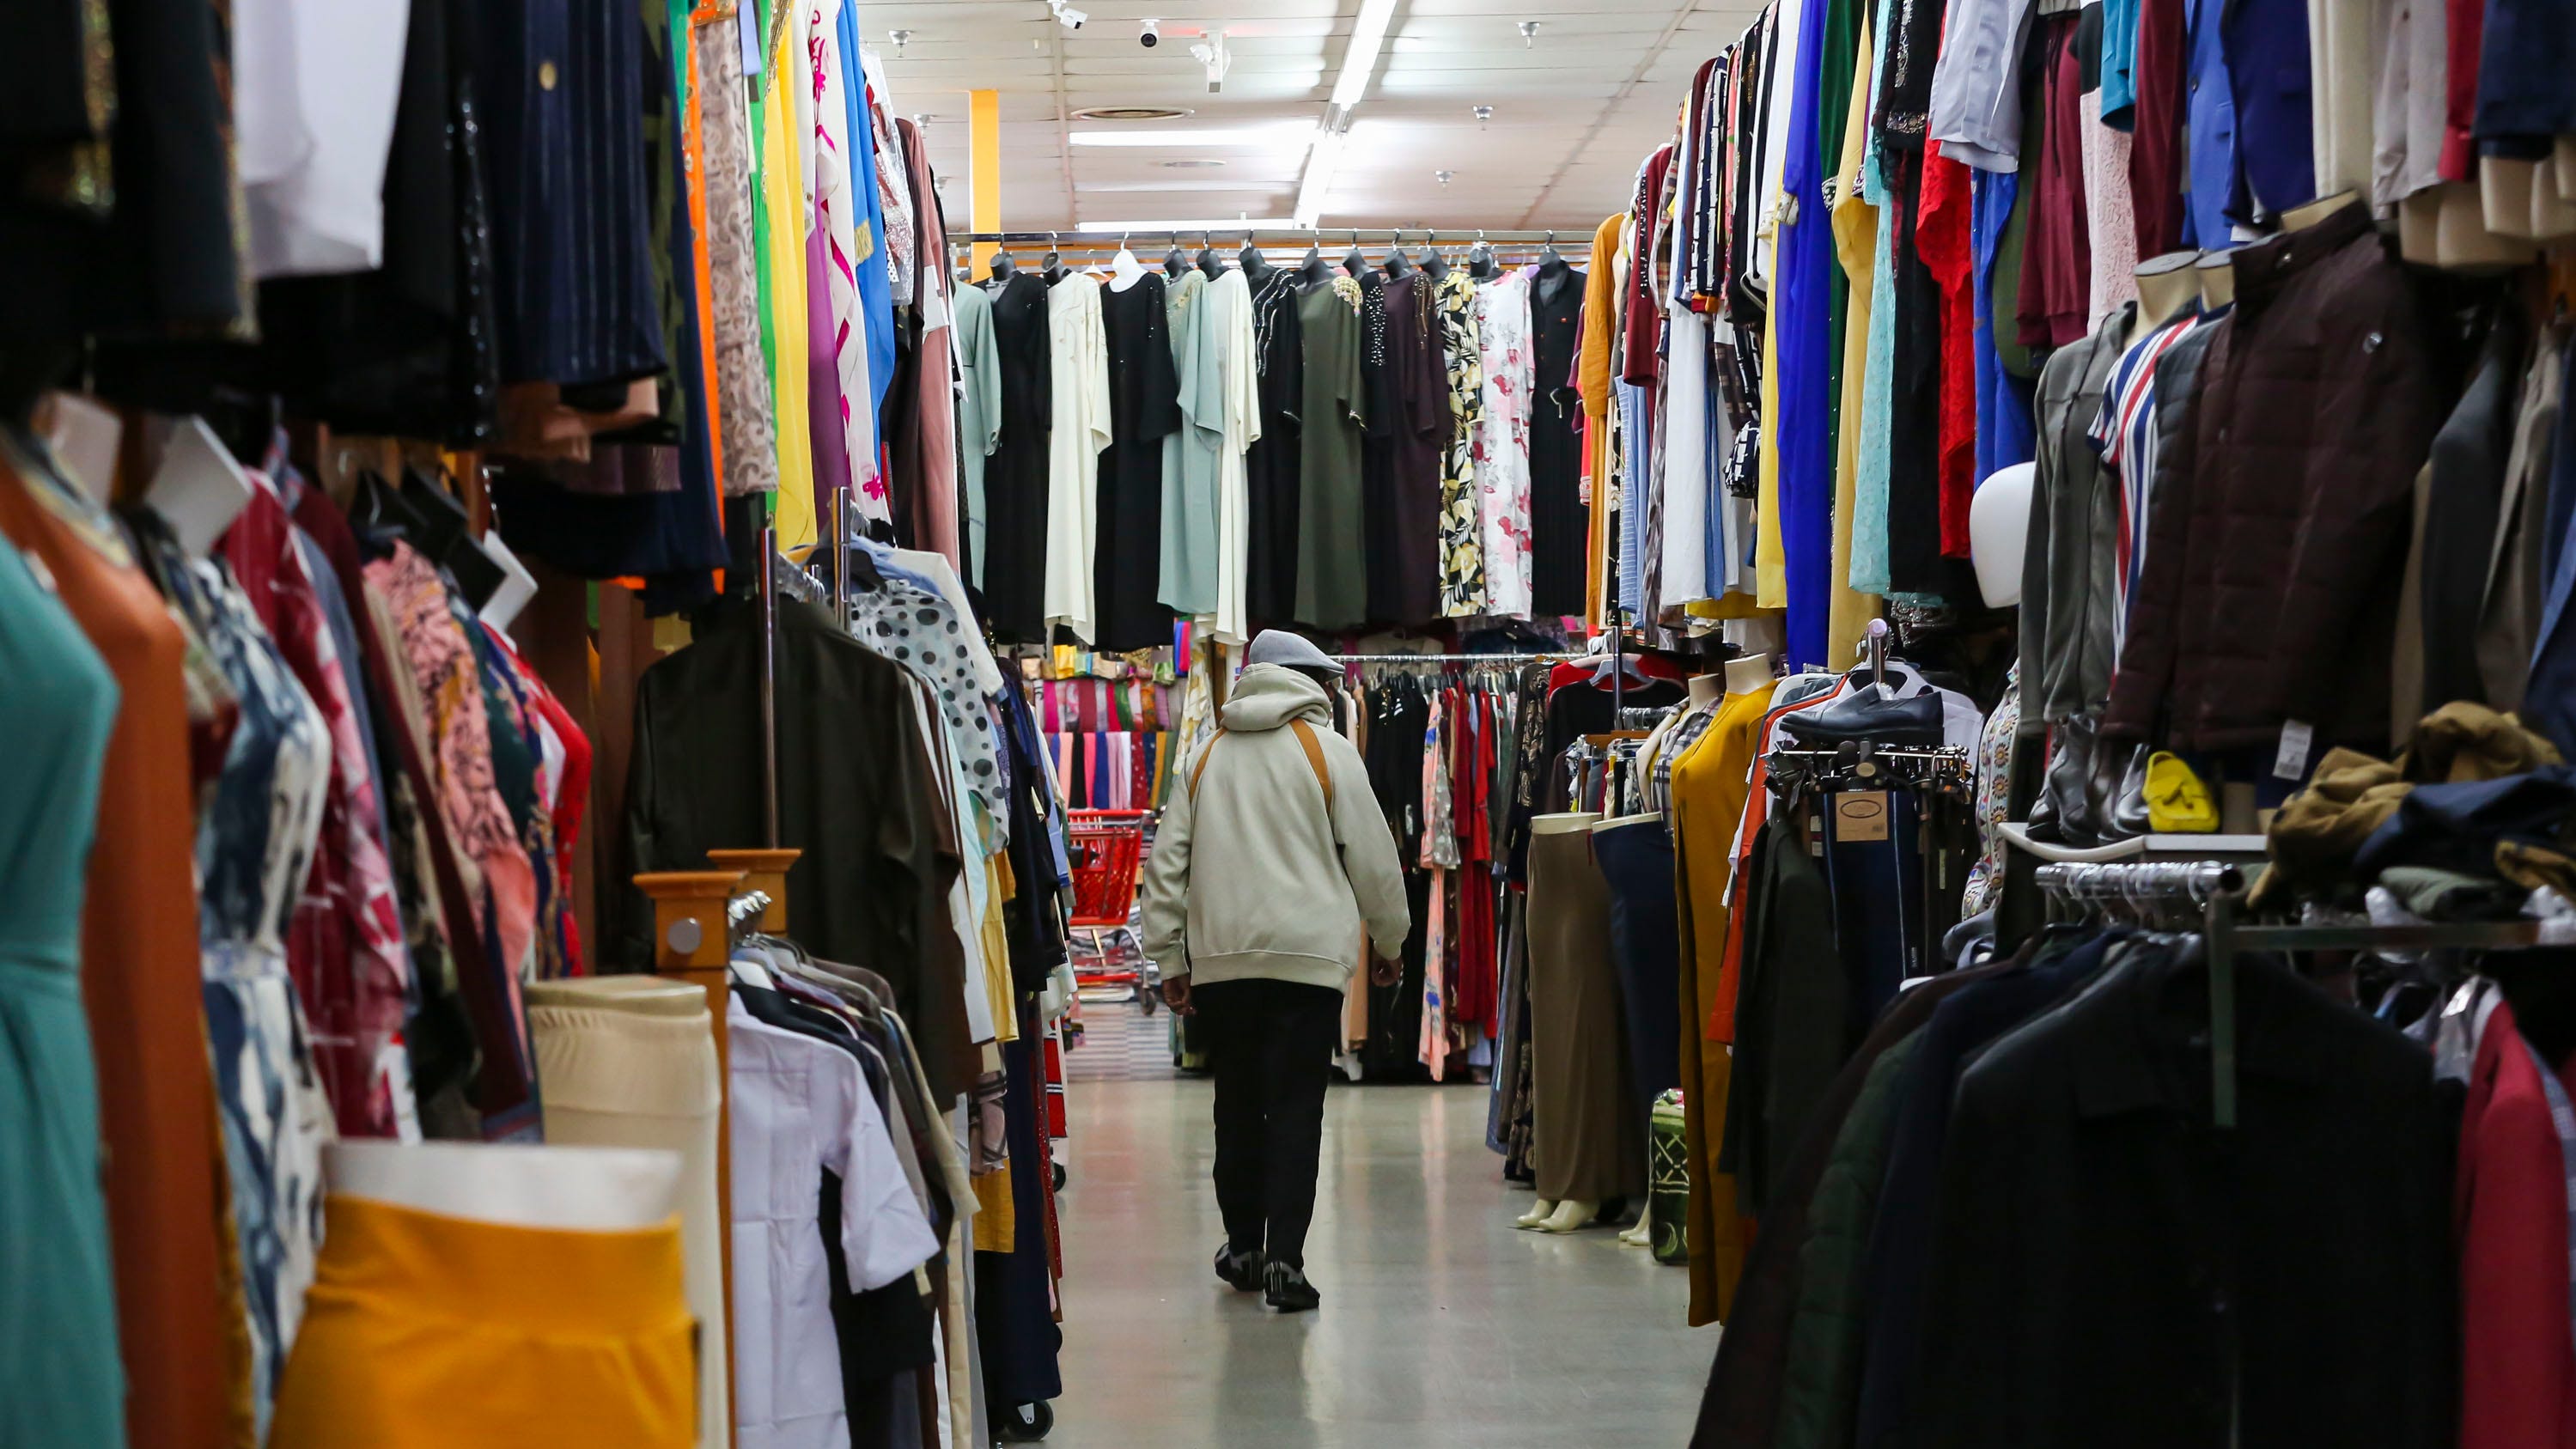 A man walks down an aisle inside the Global Mall on Morse Road. The 30 businesses that make up the mall offer a range of goods and services and are mostly owned by Somalis.